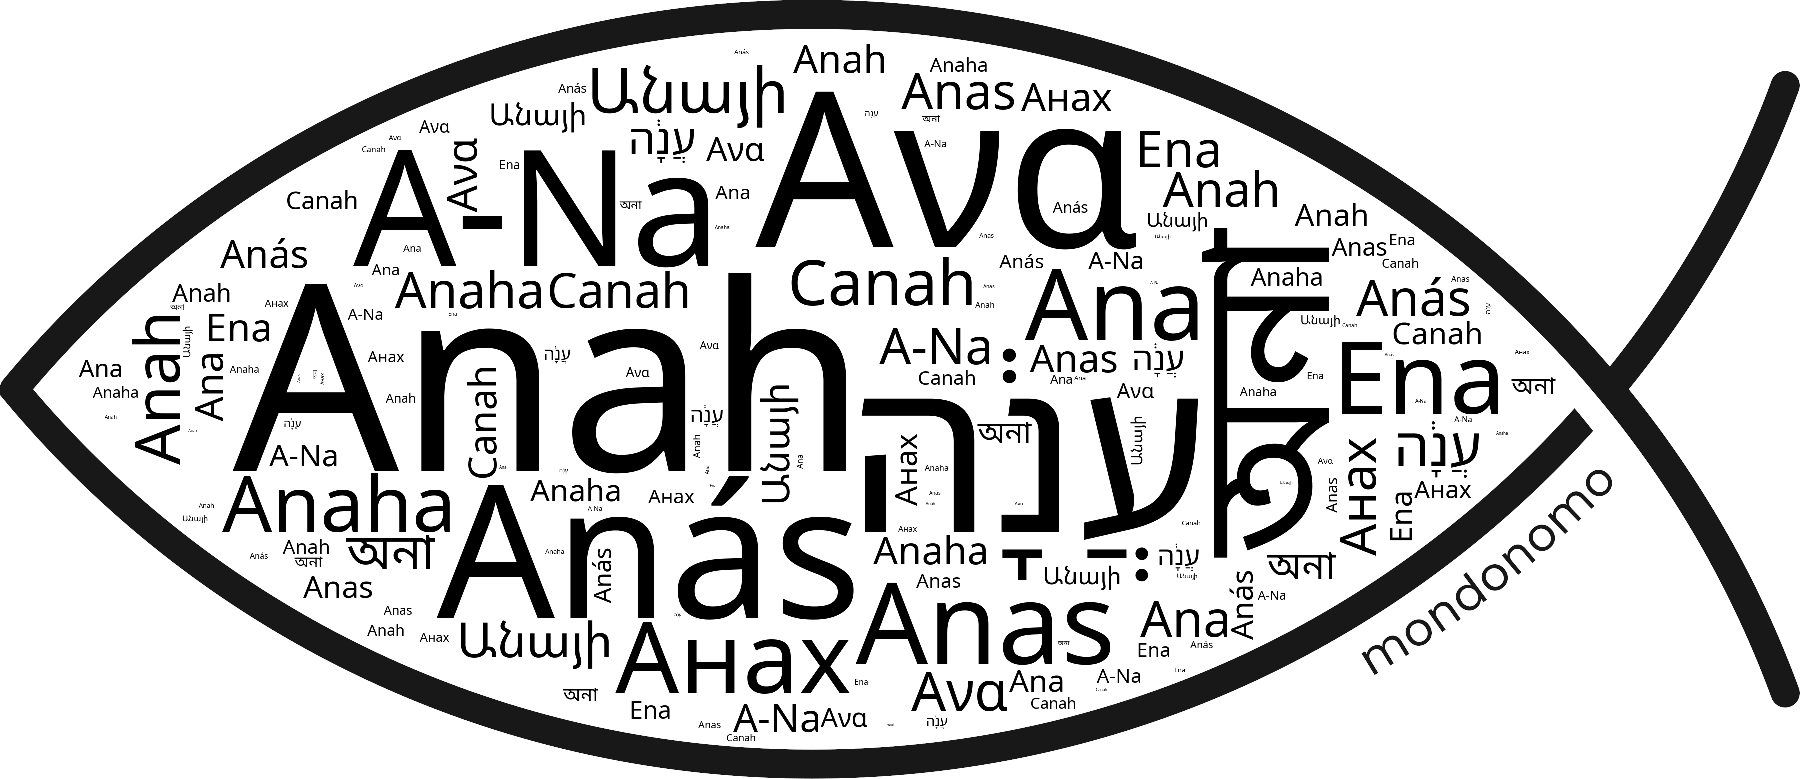 Name Anah in the world's Bibles